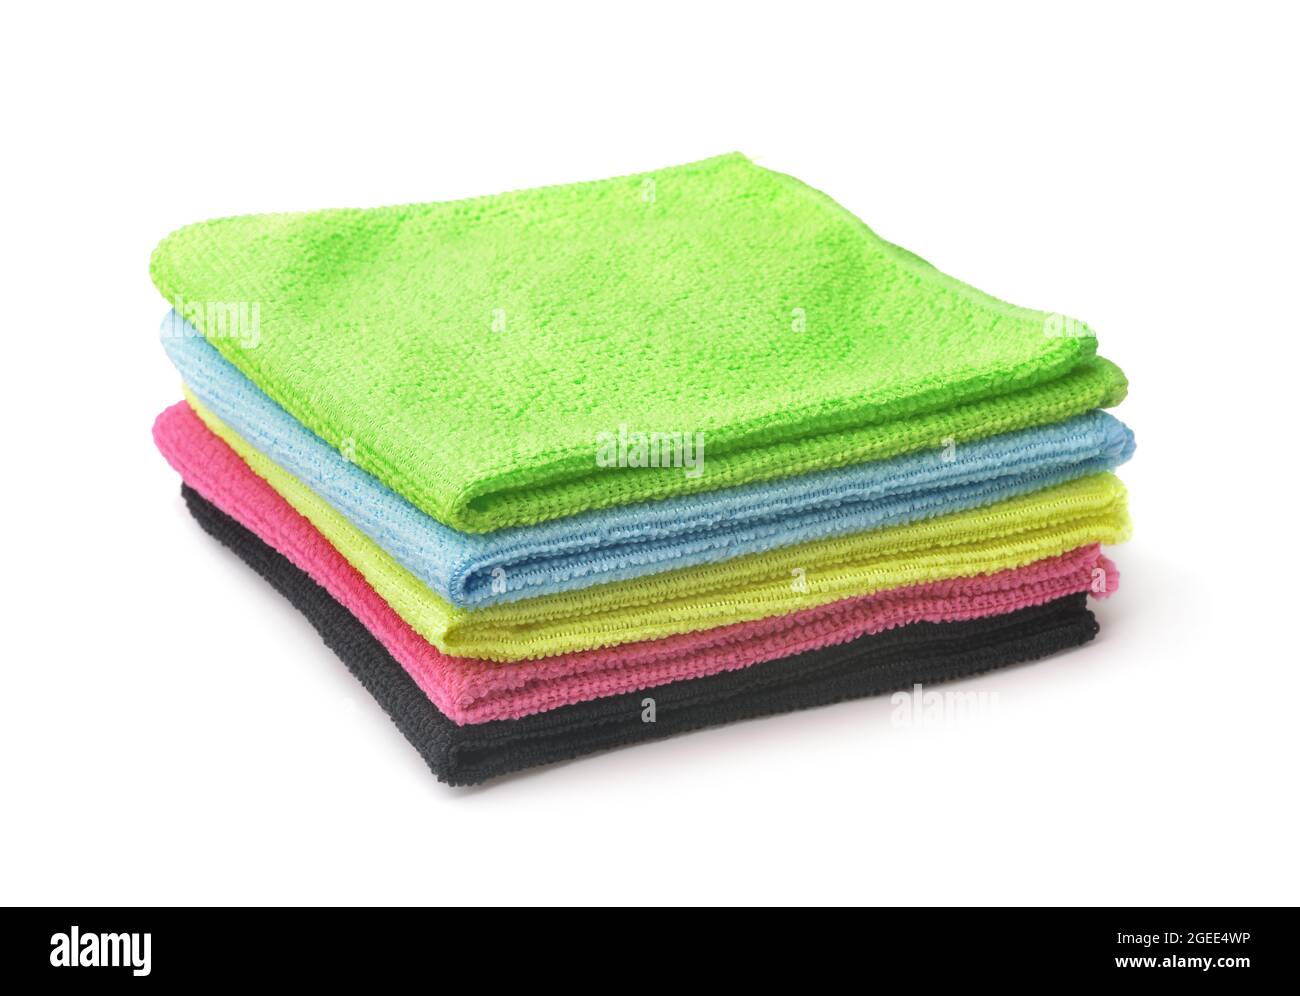 Stack of colorful microfiber cloths isolated on white Stock Photo - Alamy